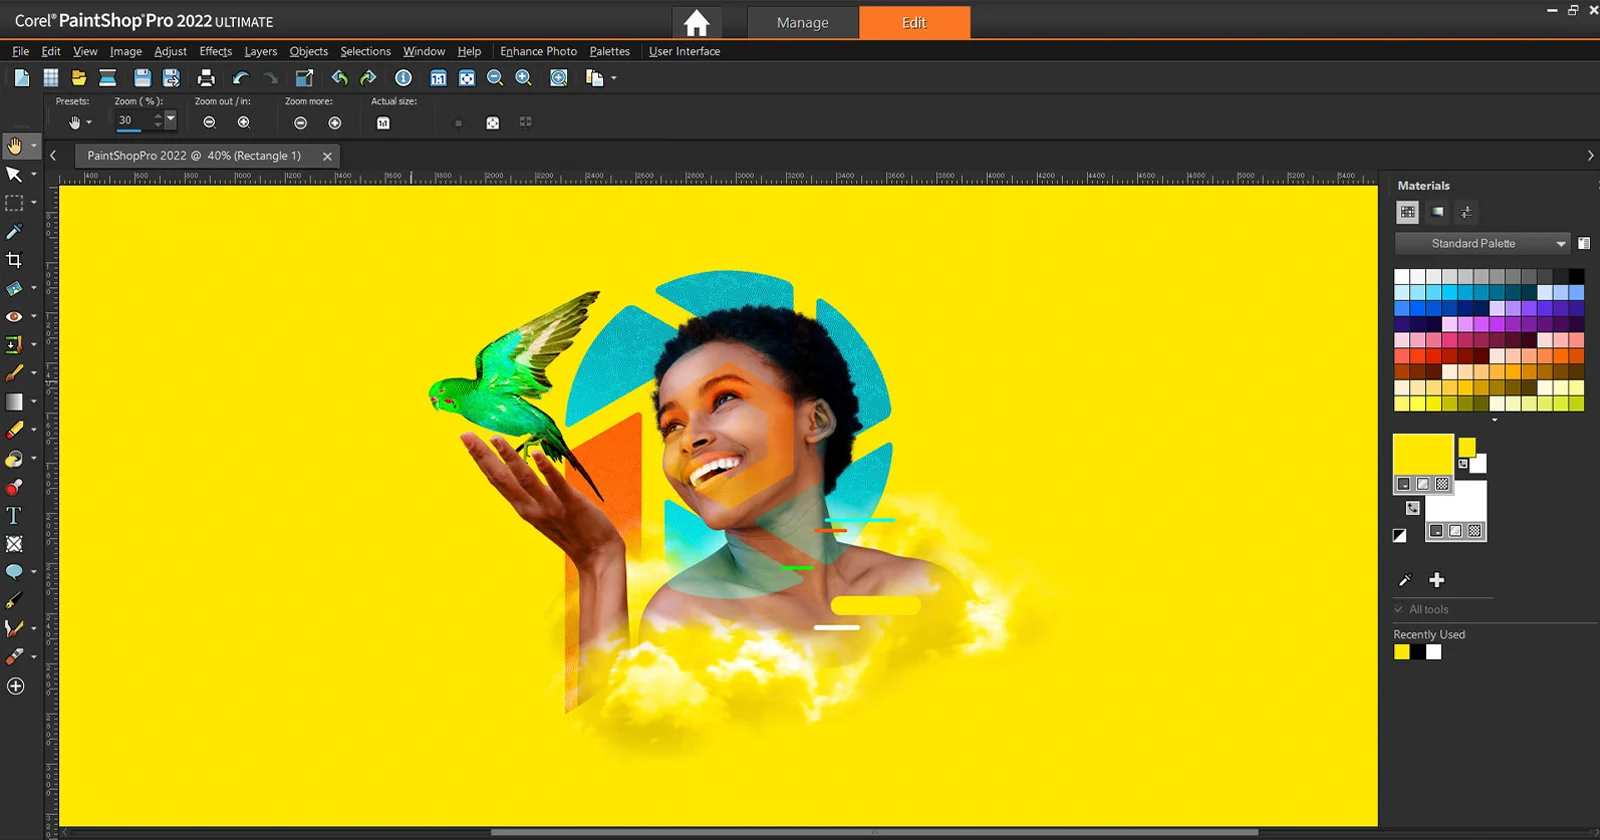 Corel PaintShop Pro is not a free software. It is a paid image editing software with a price tag attached to it. While there is a free trial version available for download, the full range of features and tools offered by the software is only accessible with a paid license. The free trial version is designed to give users a taste of what the software can do, but with limited functionality. To access all features and remove the limitations, a license must be purchased. The cost of a license for Corel PaintShop Pro varies and can depend on the version and the country of purchase. It is important to note that while there may be free alternatives or pirated versions of the software available online, using such software is illegal and can result in serious consequences. It is recommended to purchase a legitimate license from Corel or an authorized reseller to ensure access to the full range of features and support.